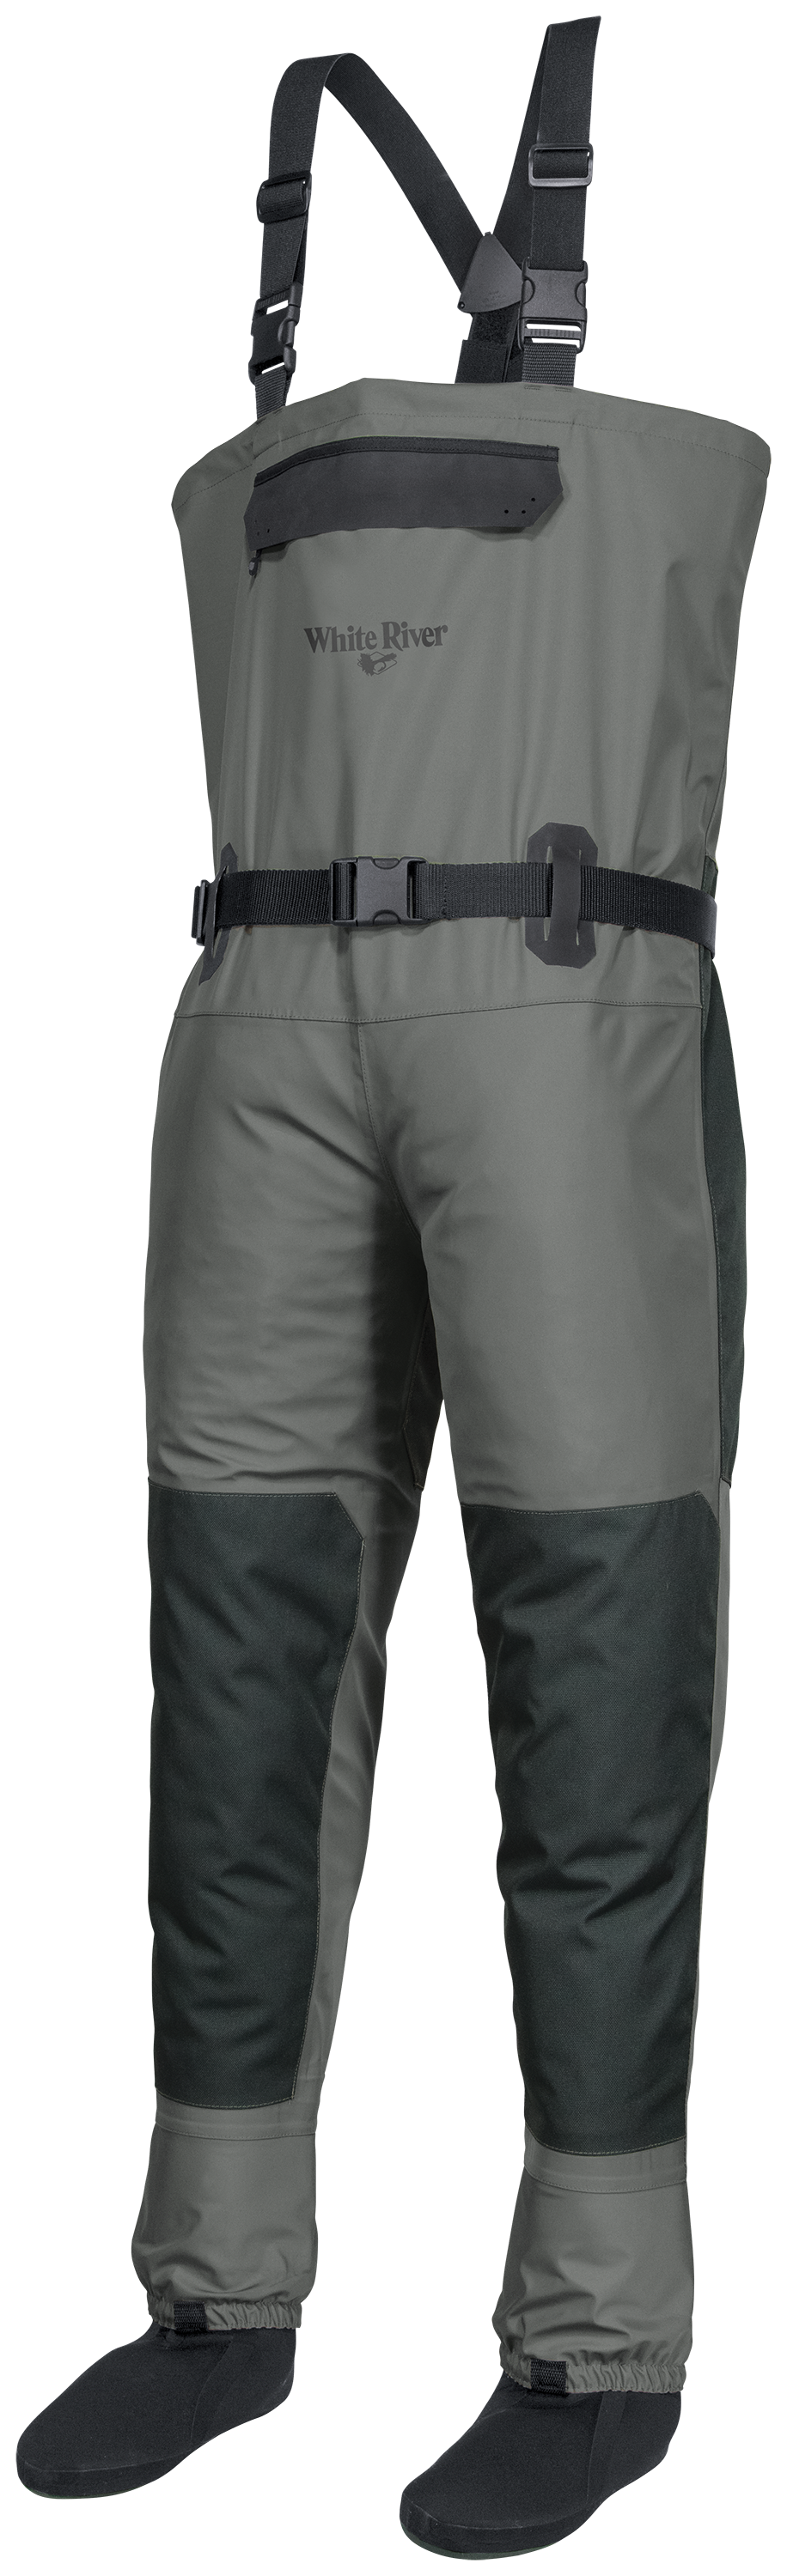 White River Fly Shop Montauk Stocking-Foot Chest Waders for Men